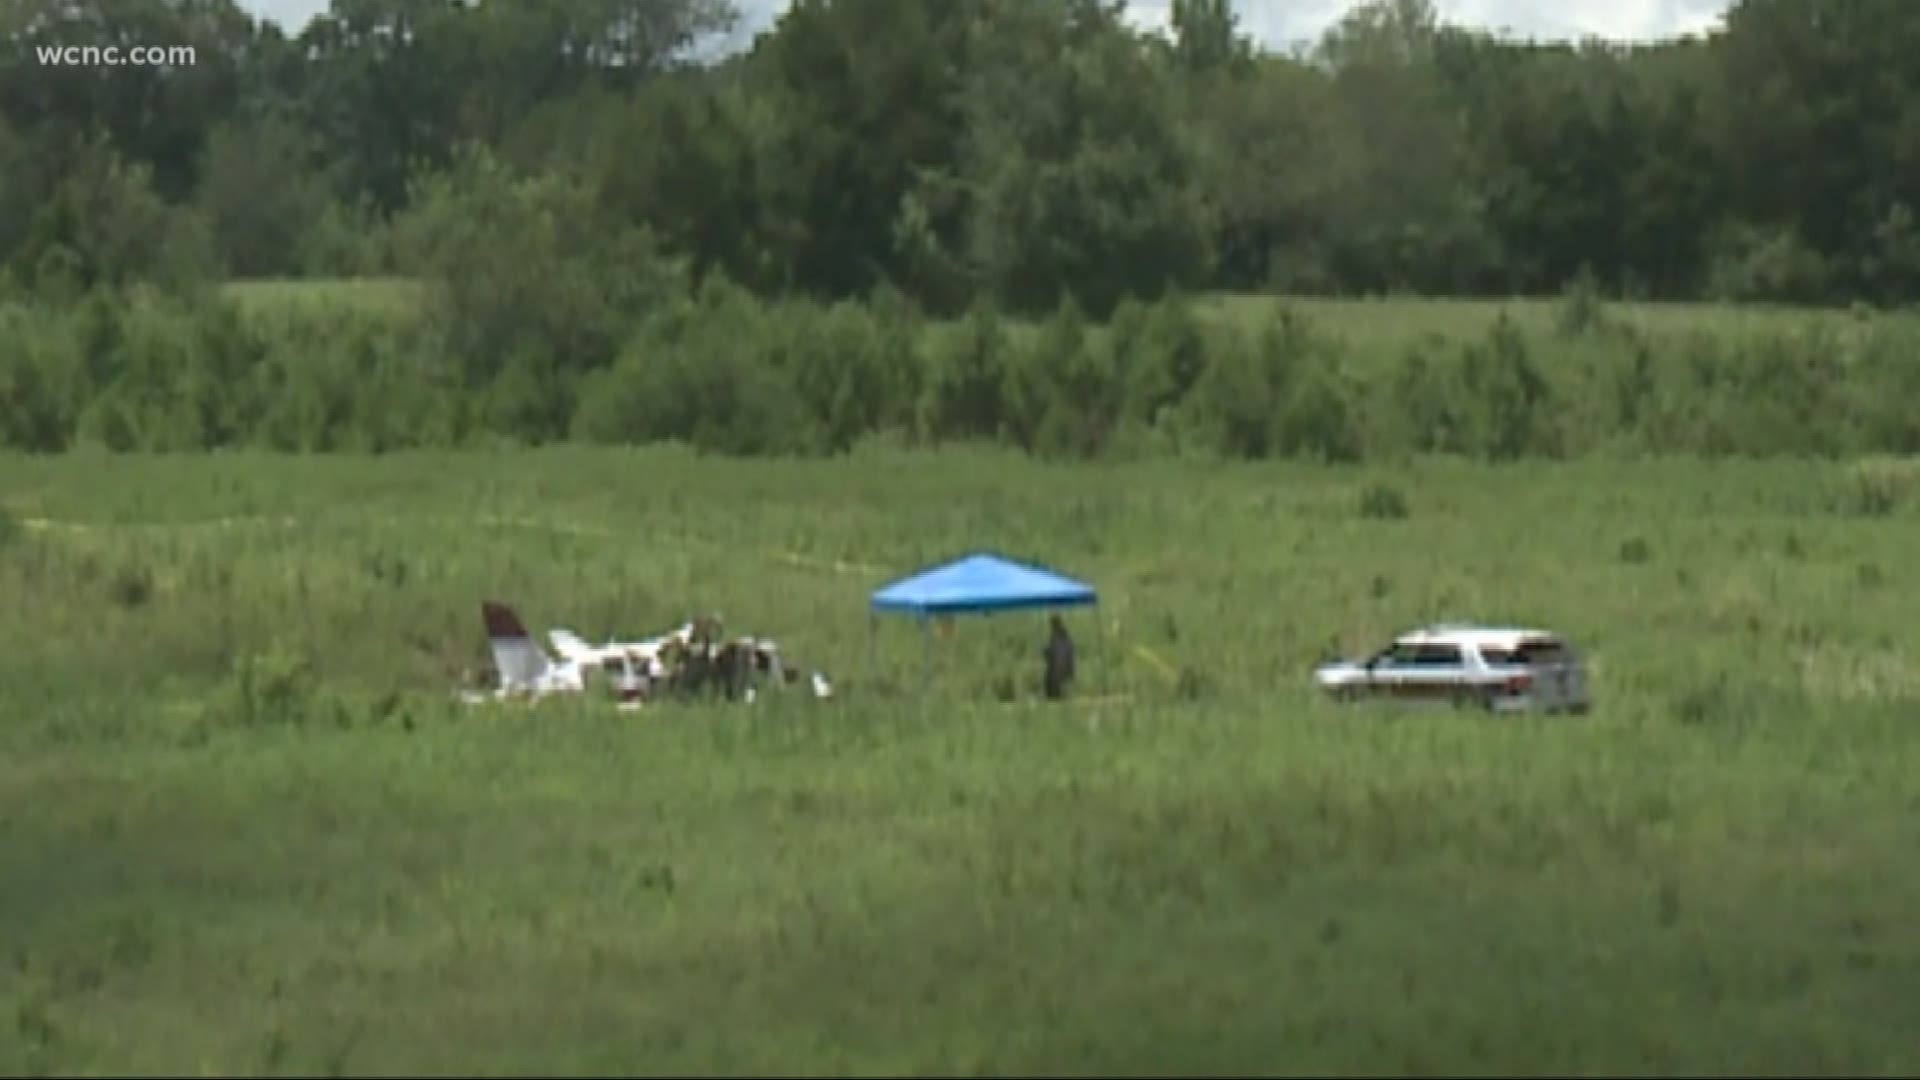 A plane has crashed near the Lincoln County Airport early Tuesday morning.